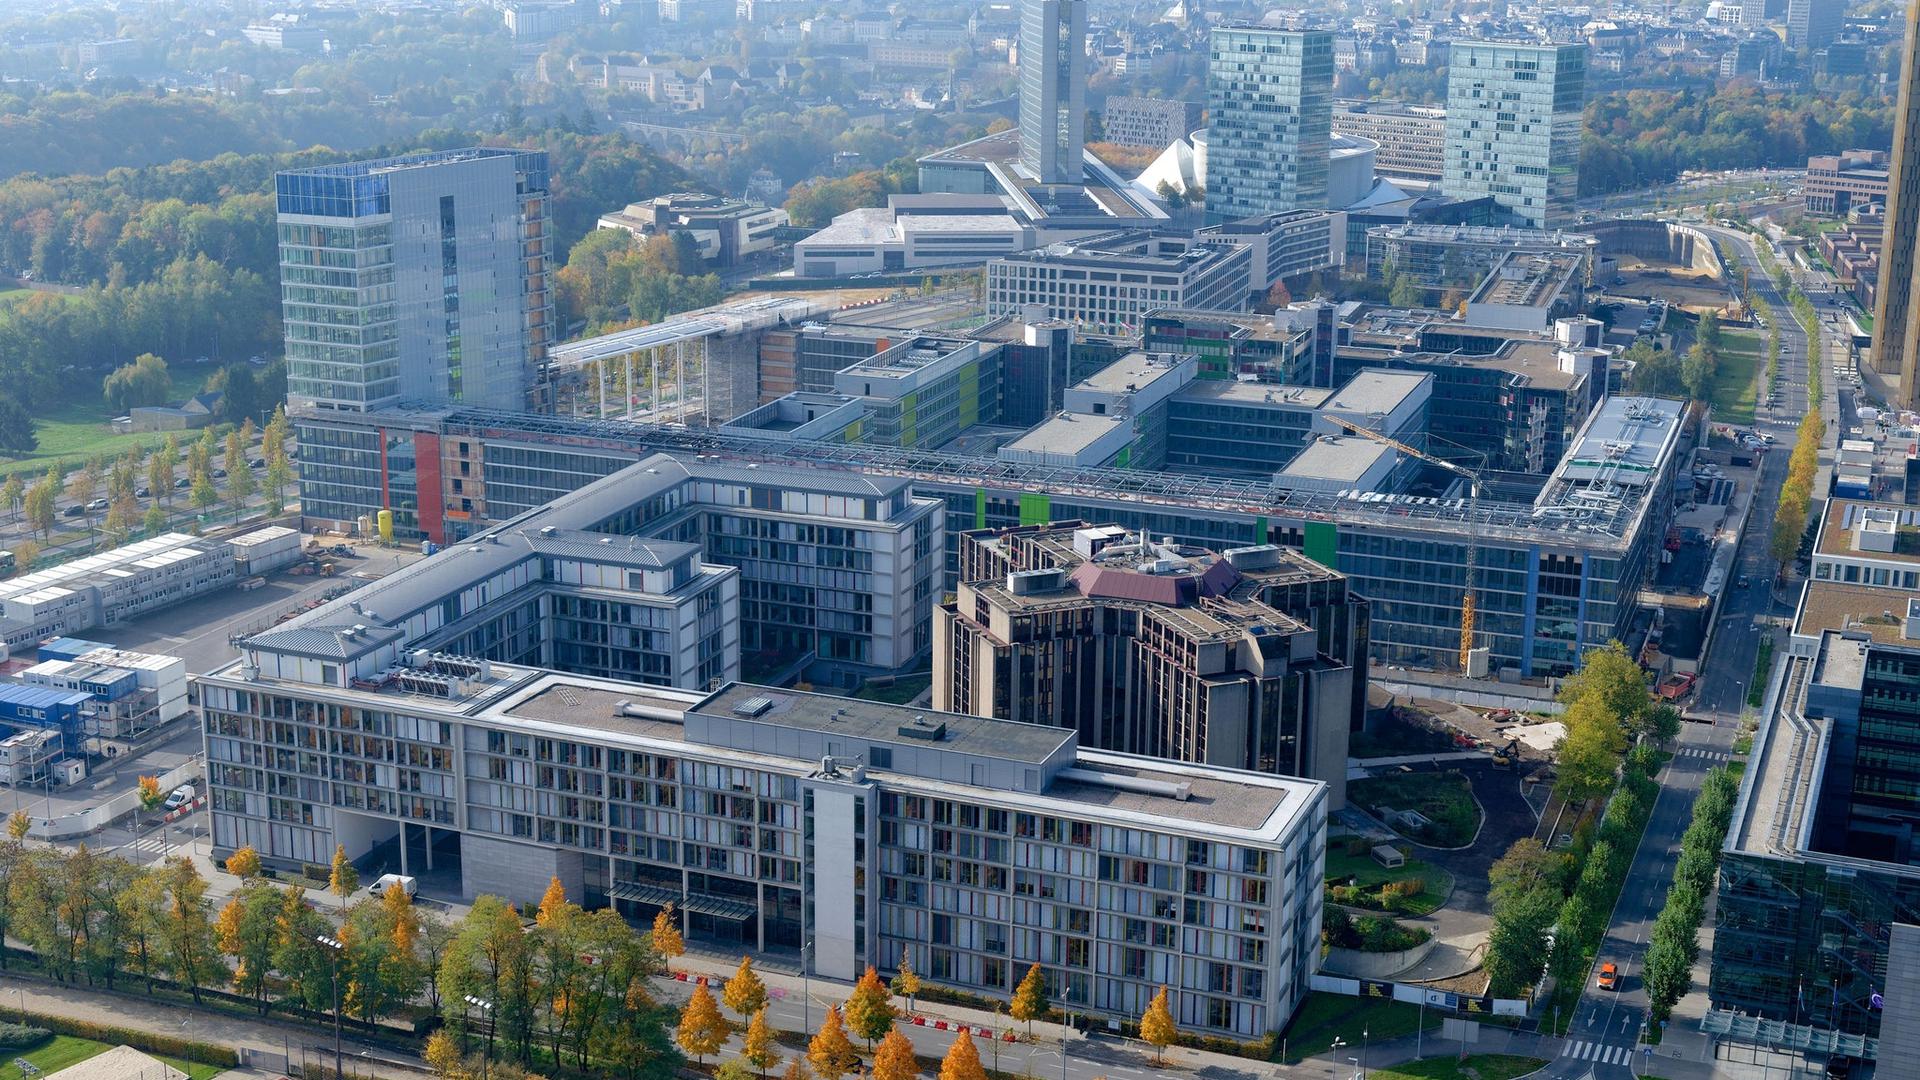 The European Court of Auditors in Luxembourg's Kirchberg area